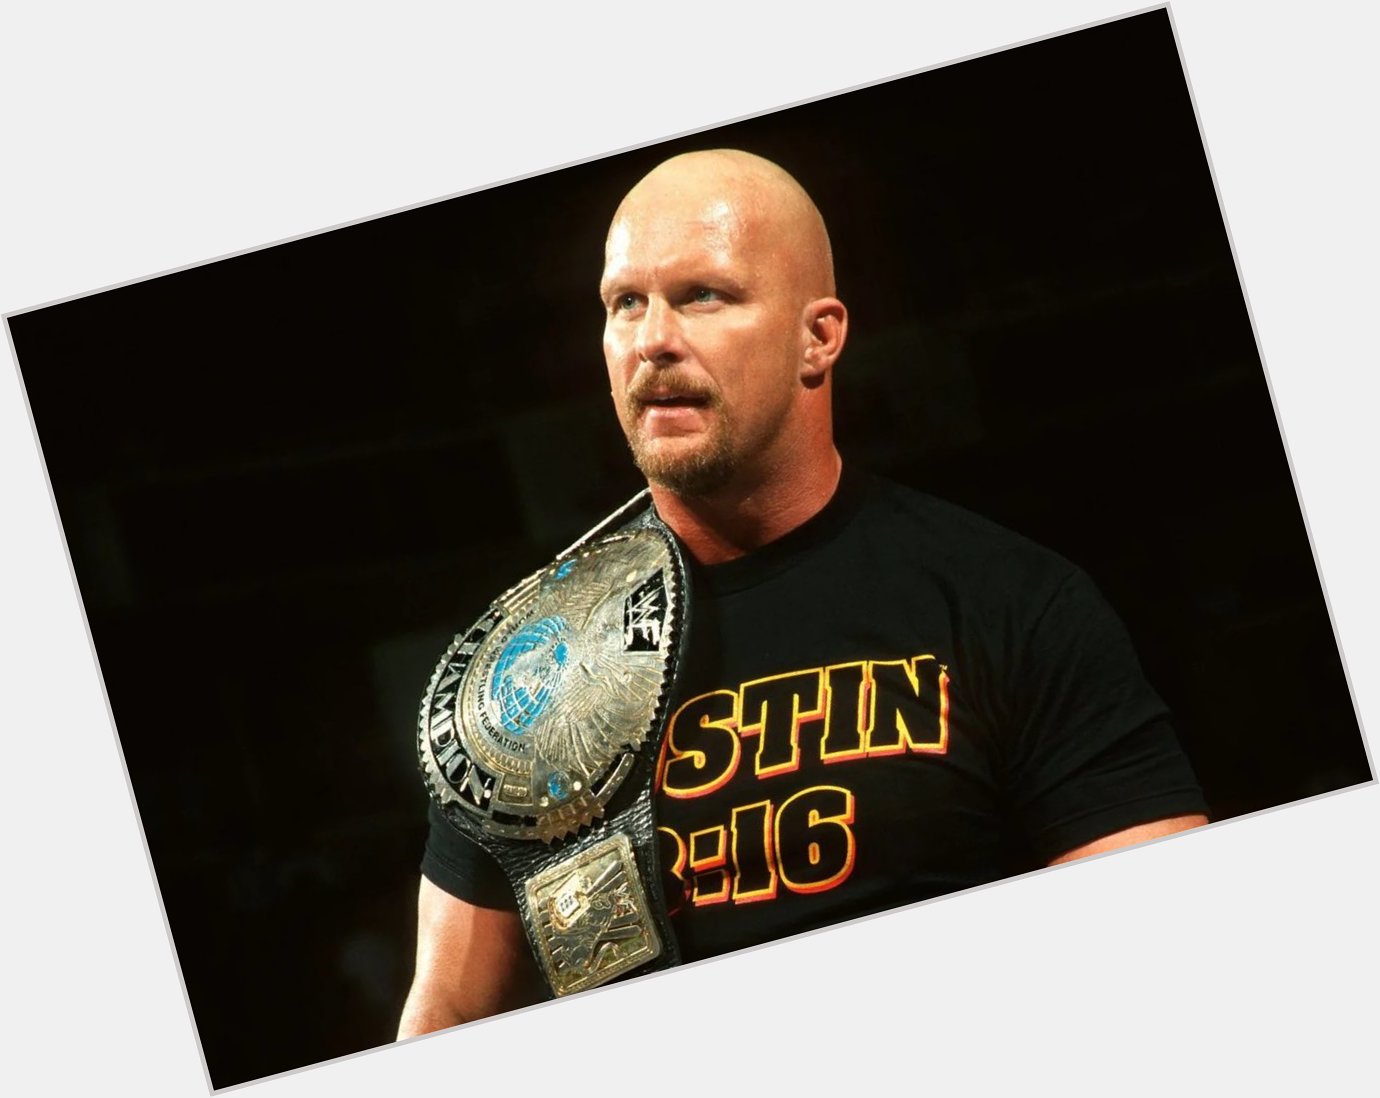 Happy birthday to a and a man who made wrestling cool, Stone Cold Steve Austin. 